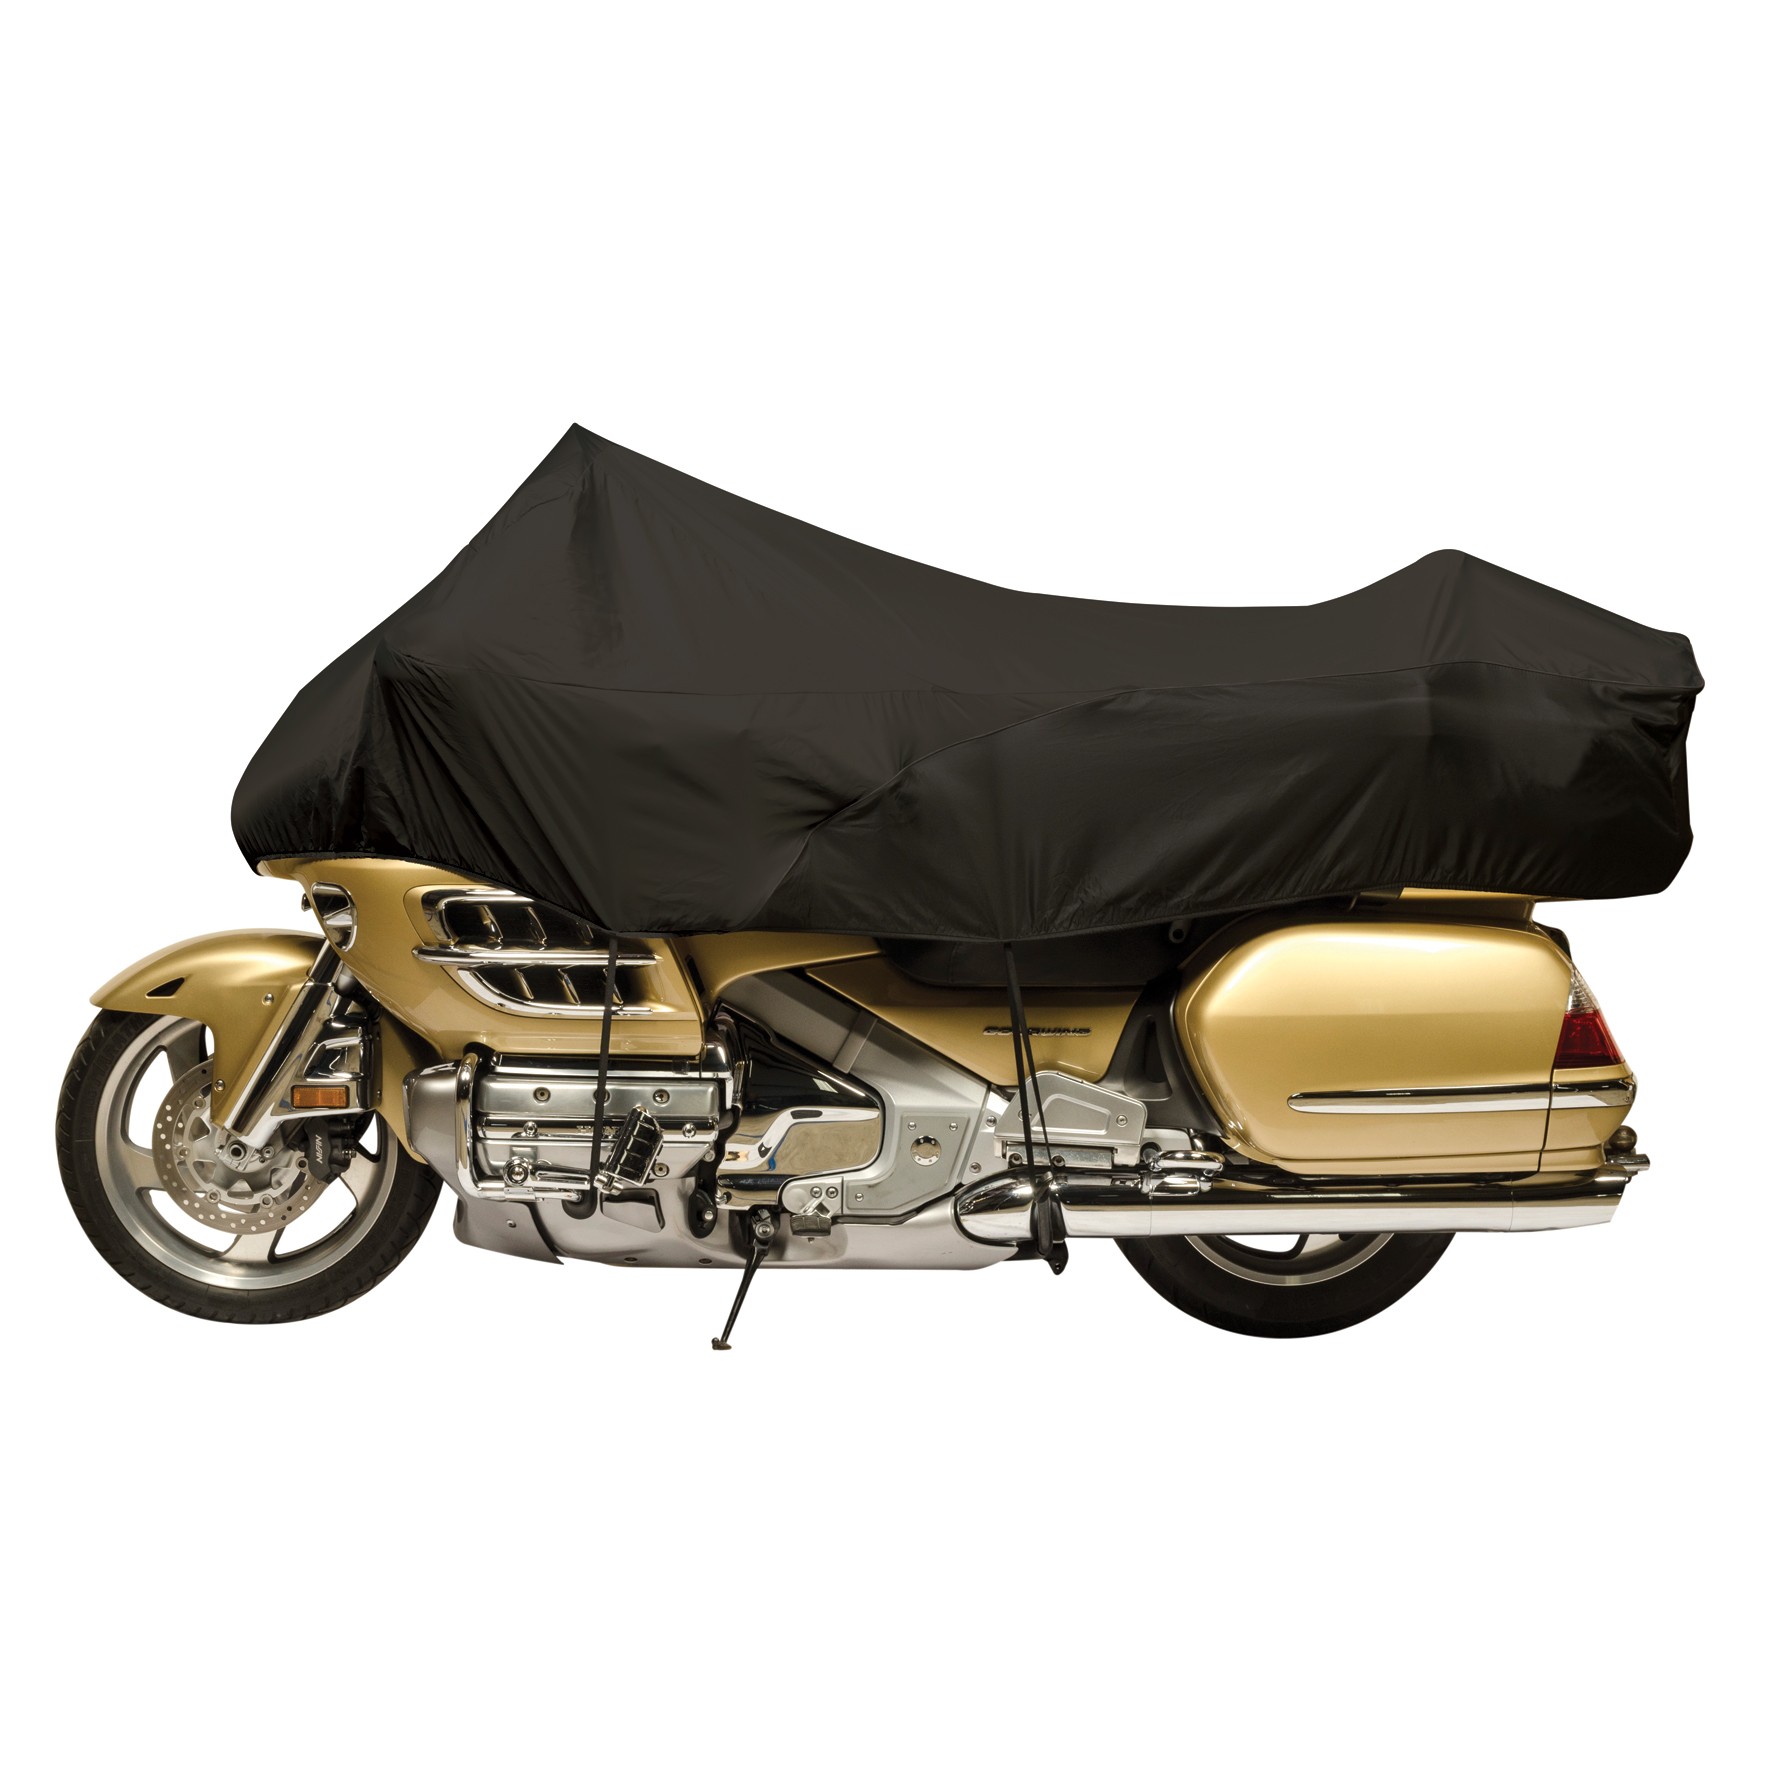 Dowco Guardian Premium Half Cover on a Honda Gold Wing